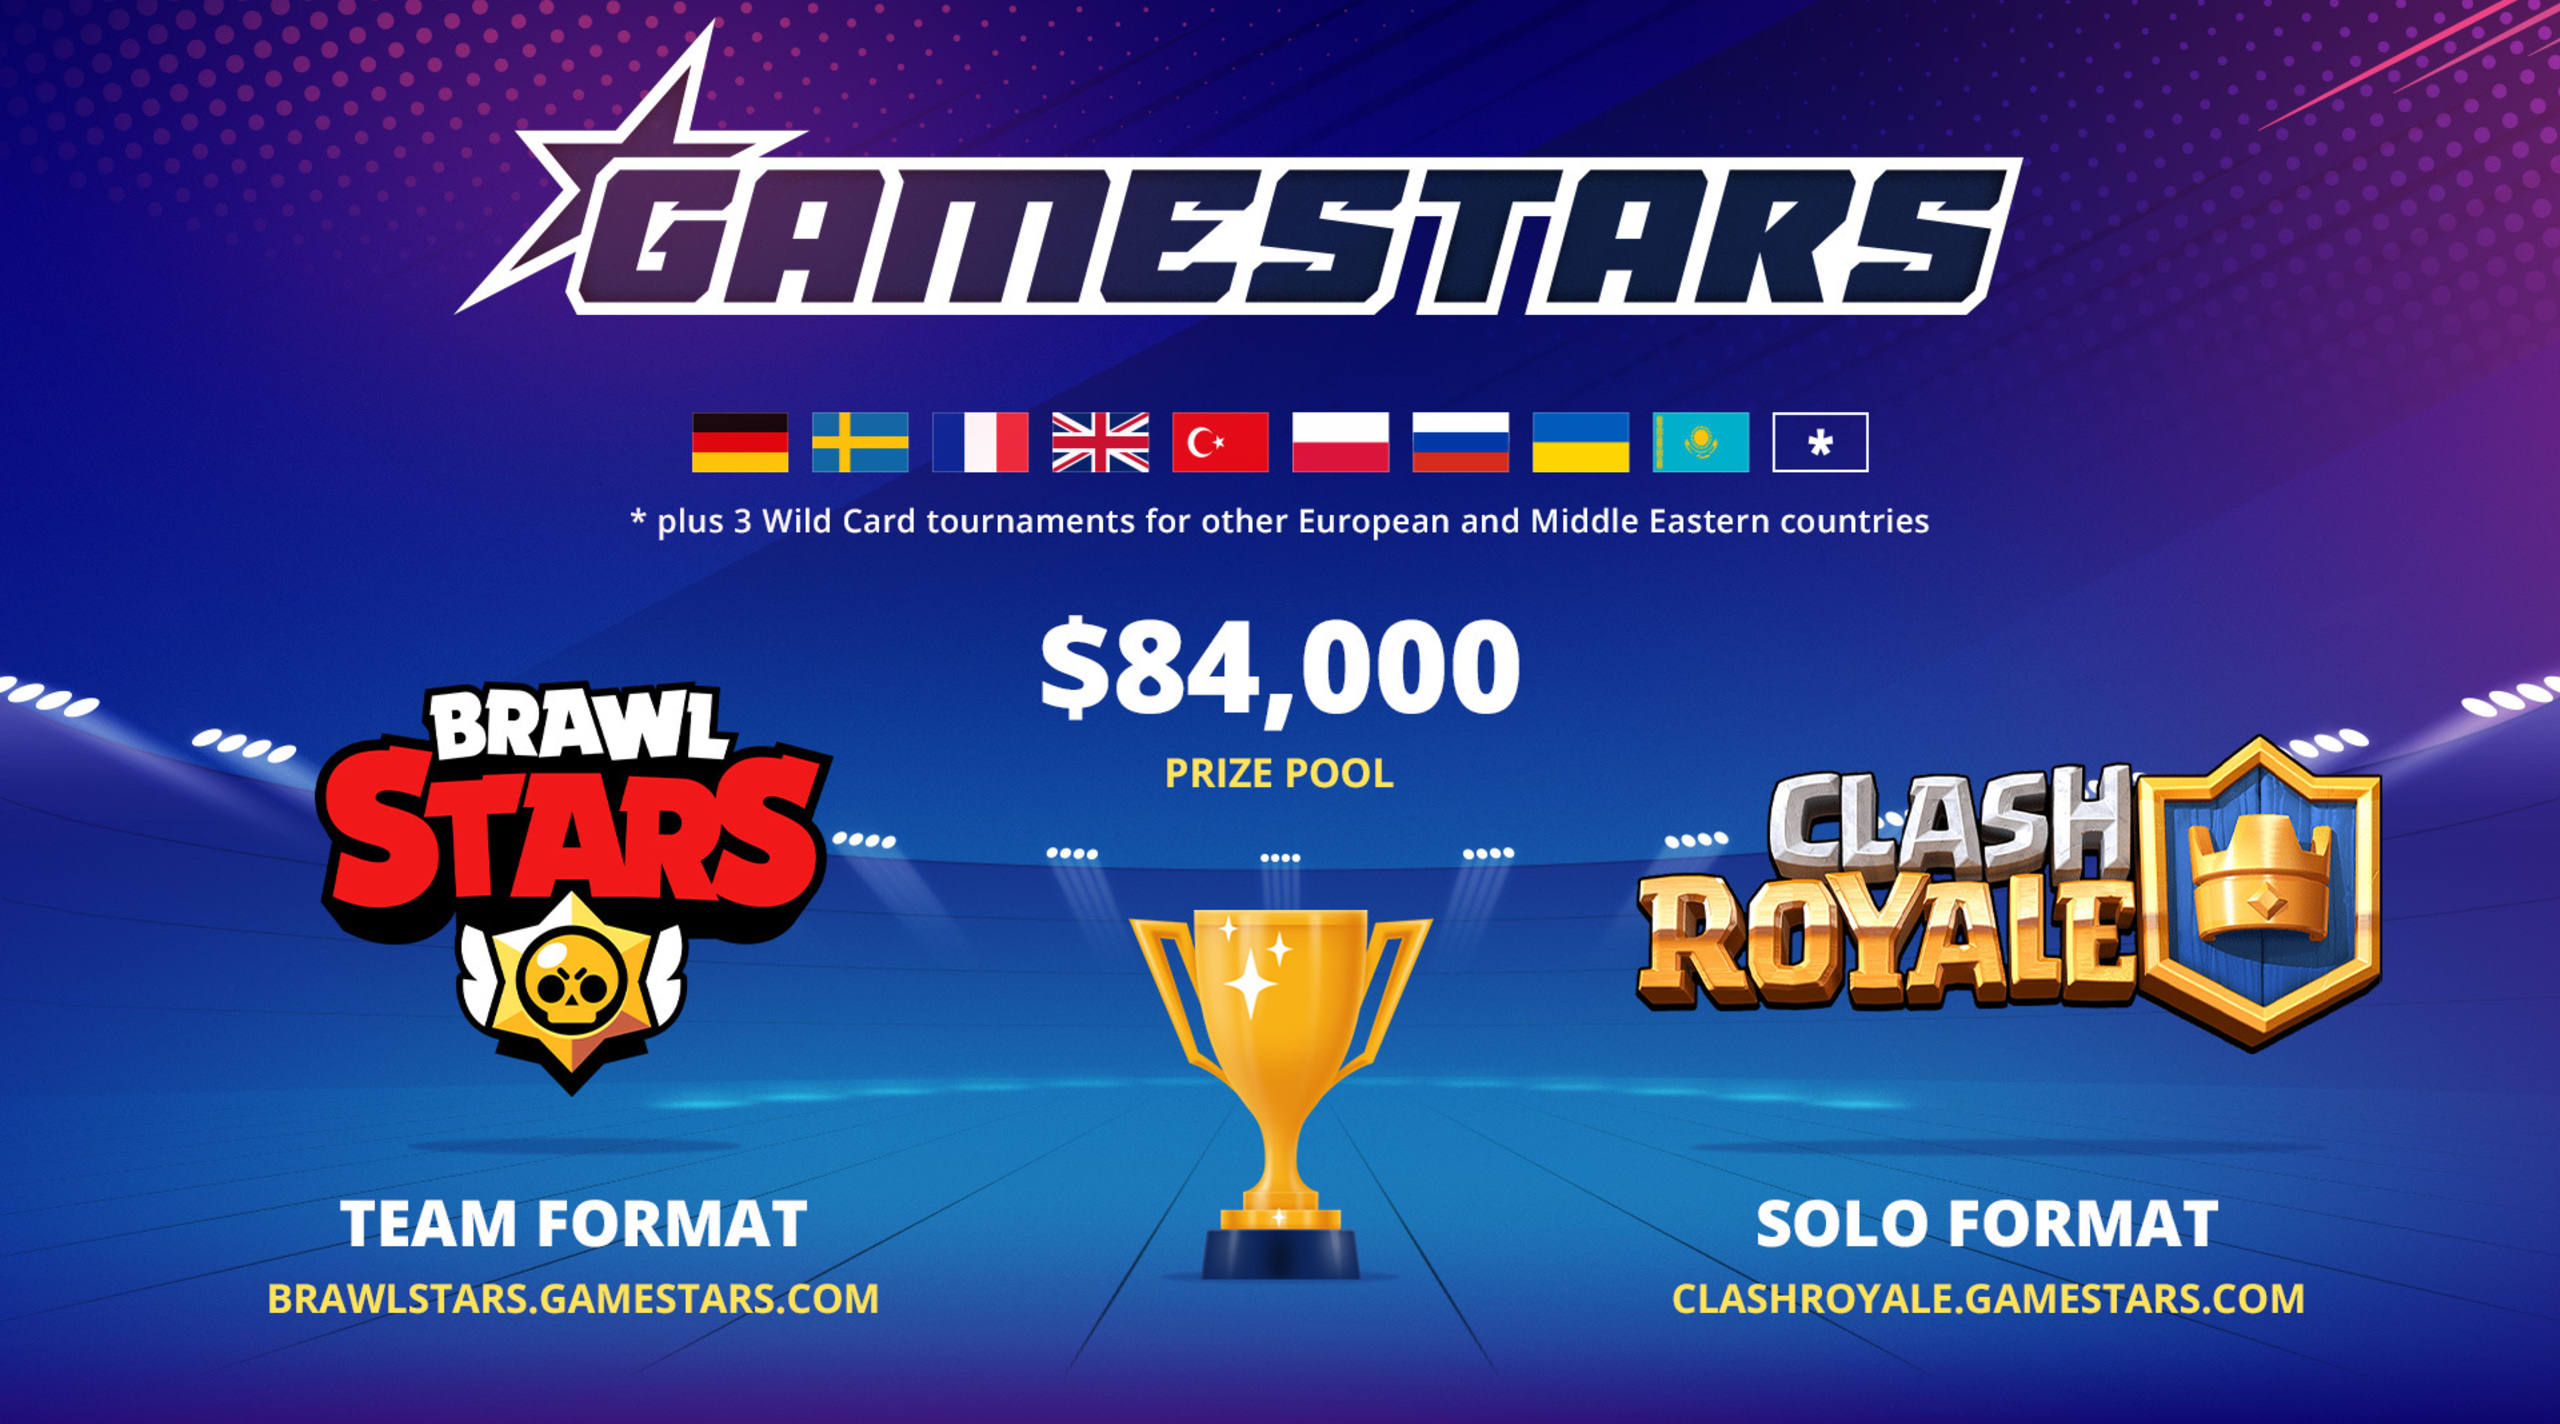 Starladder To Launch The First Season Of Gamestars League For The Brawl Stars And Clash Royale Players Starladder - brawl stars font